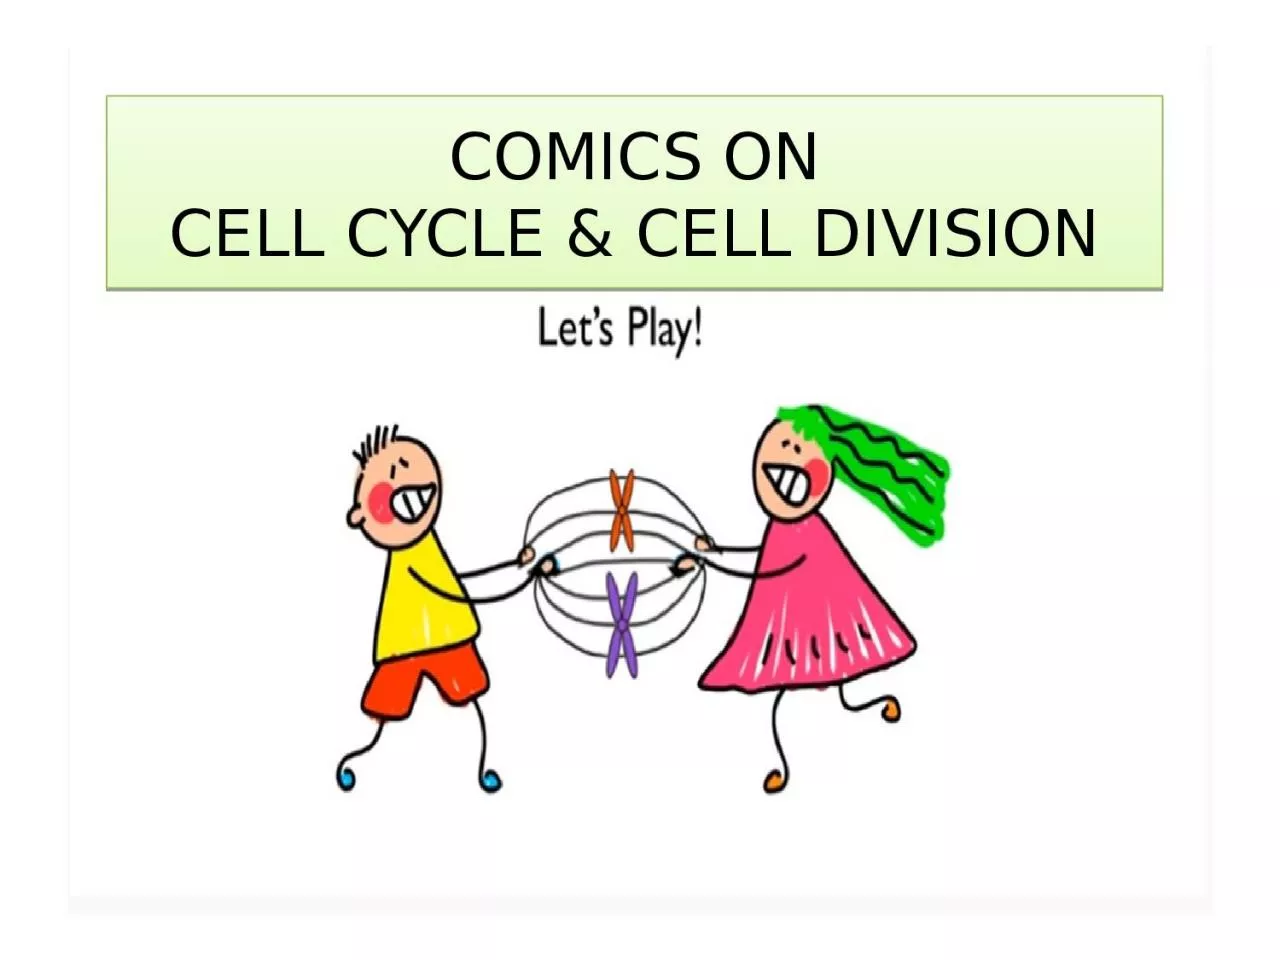 COMICS ON CELL CYCLE & CELL DIVISION